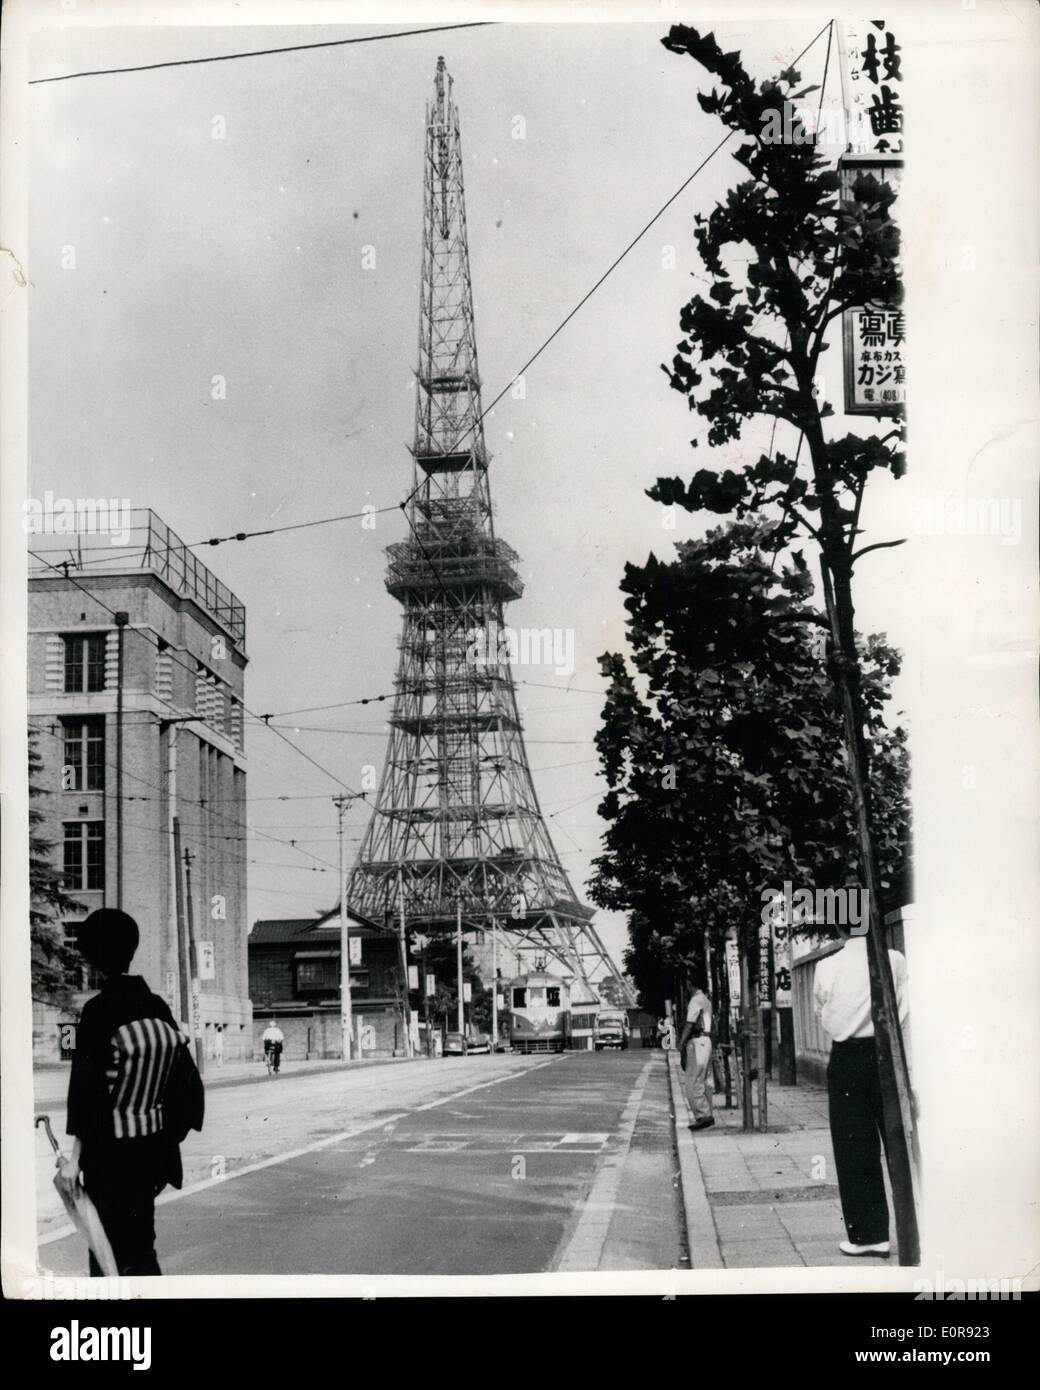 Aug. 08, 1958 - Tokyo's ''Eiffel Tower'' going up fast: Tokyo's new television tower - which is very like the Paris Eiffel Tower - but taller - is now well past the second stage of construction at Shiba Park, Tokyo.. Air Line companies are getting worried about its effect on aircraft from the machines have to make a turn nearby - and in misty weather it could be hard to sec... The tower, however is to be equipped with flashing lights that can be seen fifty miles away. Photo shows Tokyo's ''Eiffel Tower'' reaching is final b- top storey. Stock Photo